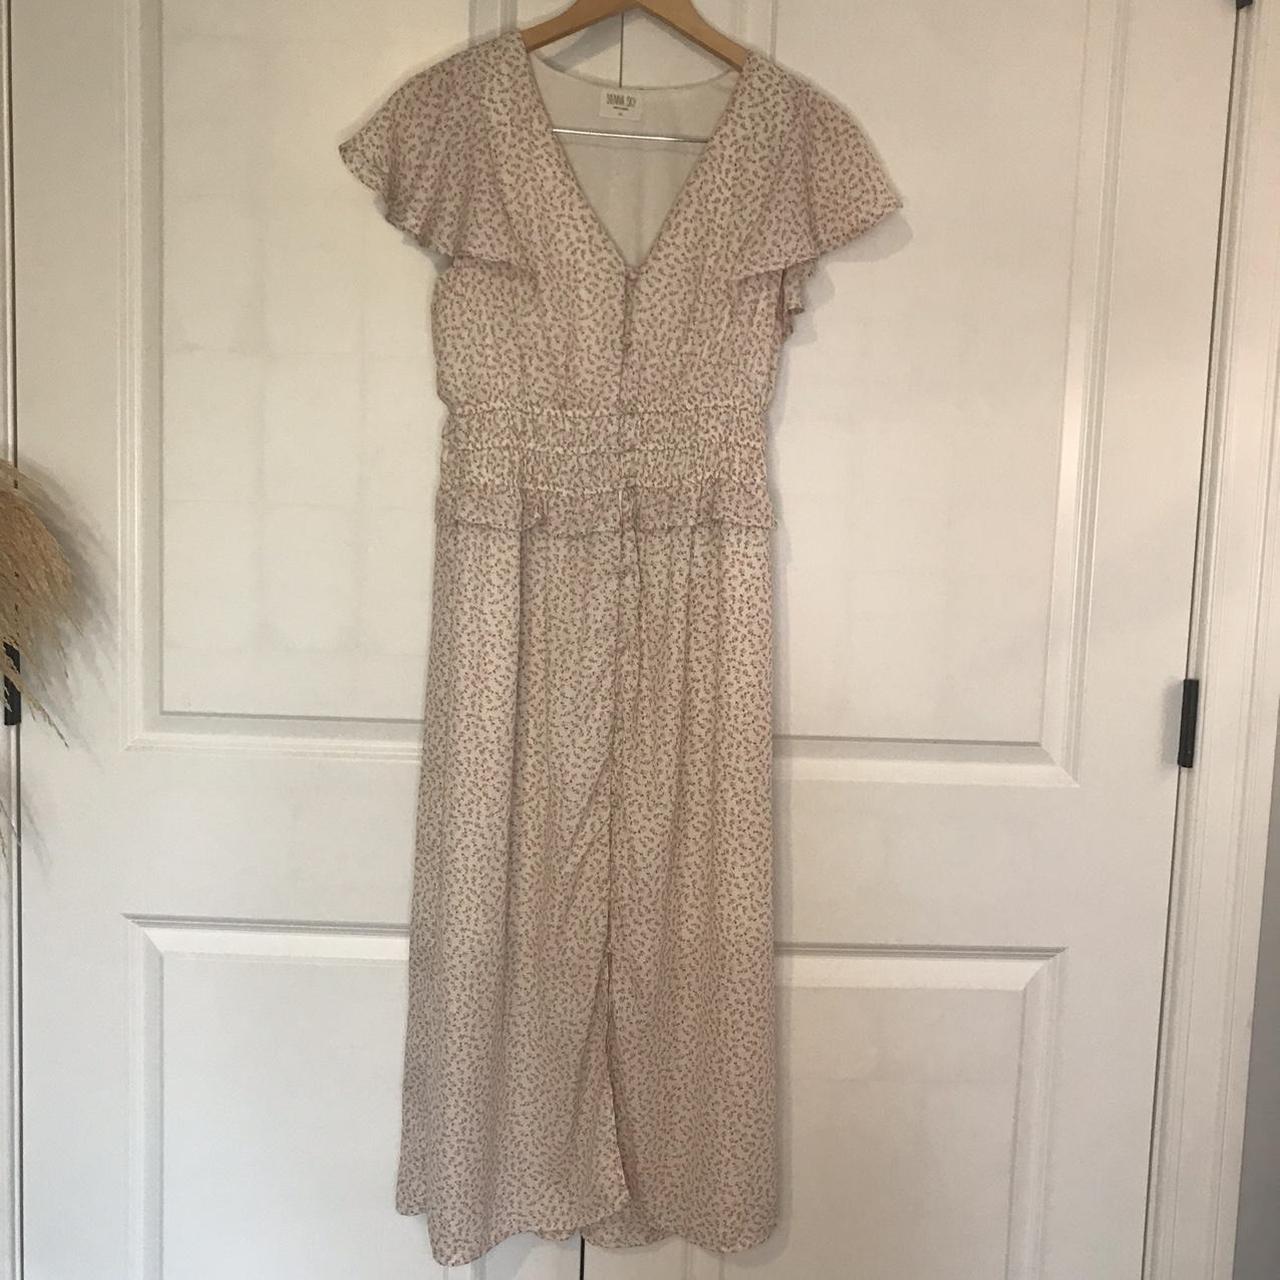 Women's White and Pink Dress | Depop